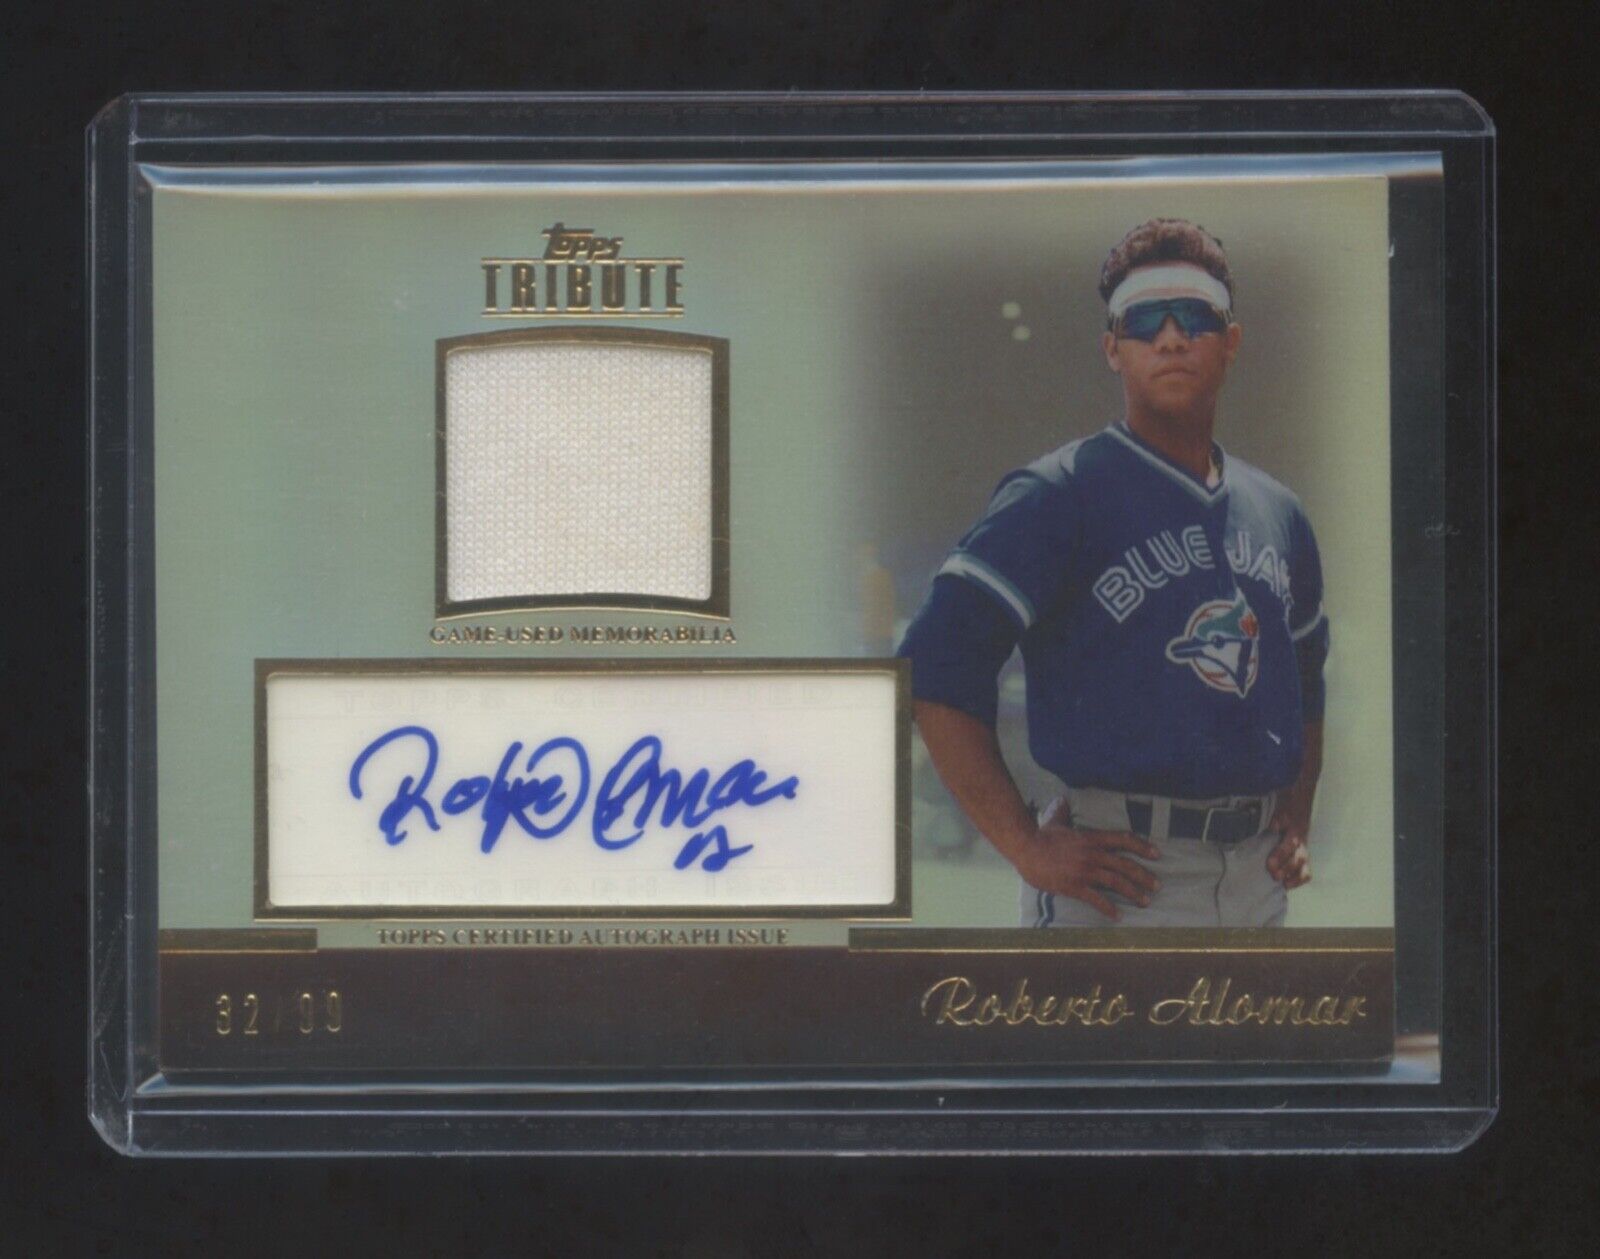 2011 TOPPS TRIBUTE ROBERTO ALAMAR AUTOGRAPH GAME JERSEY 32/99 RARE  $450 A PACK